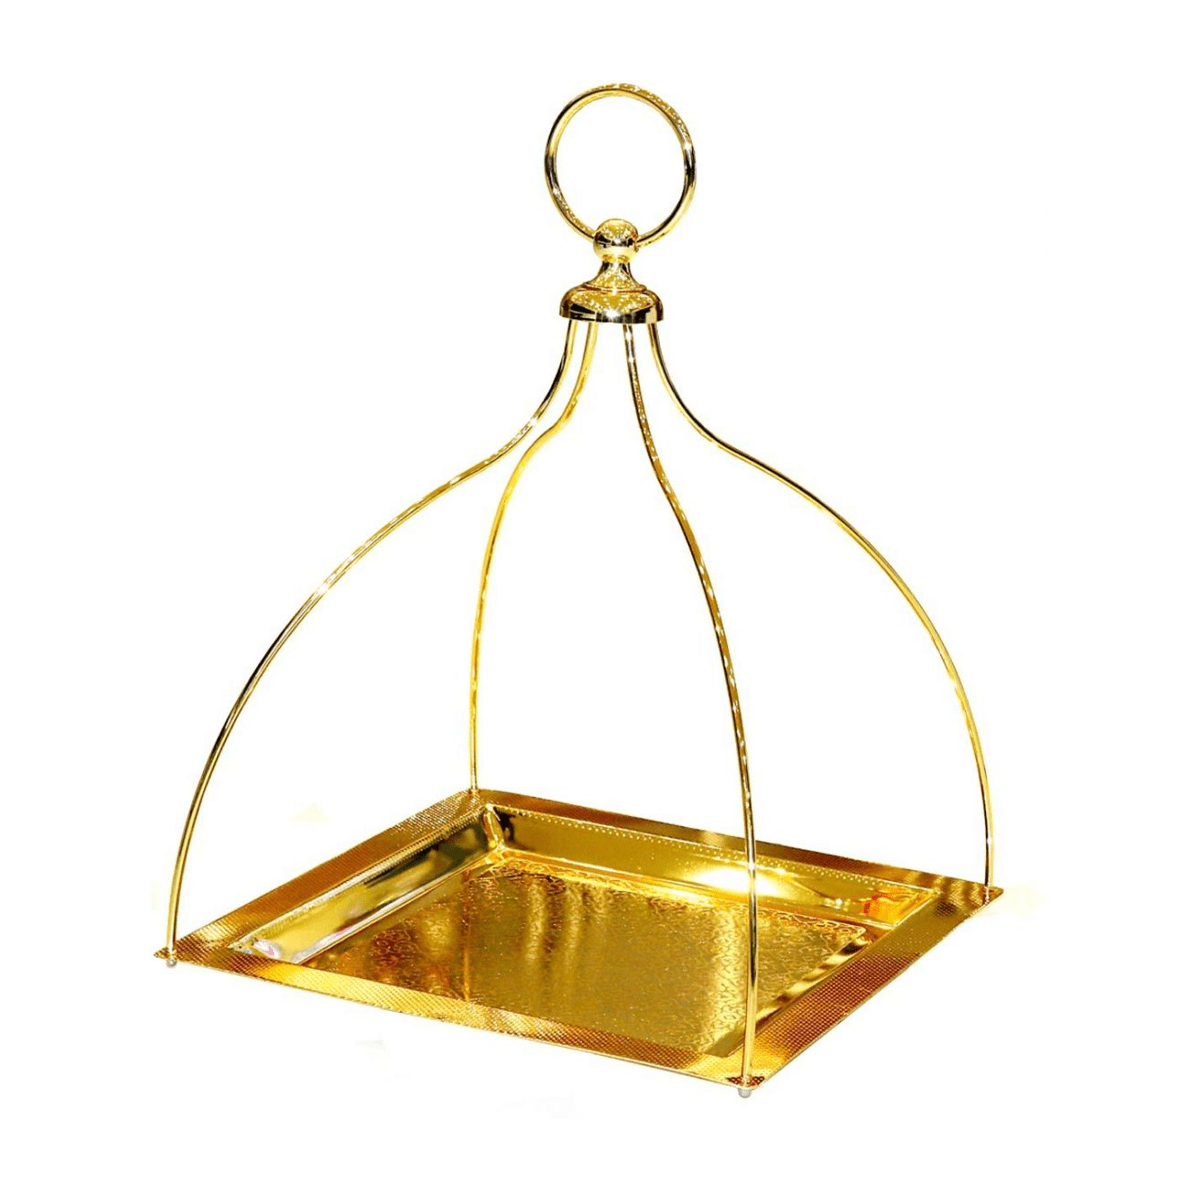 Liying Stainless Steel Square Serving Tray with Handle 42x42 cm, Gold